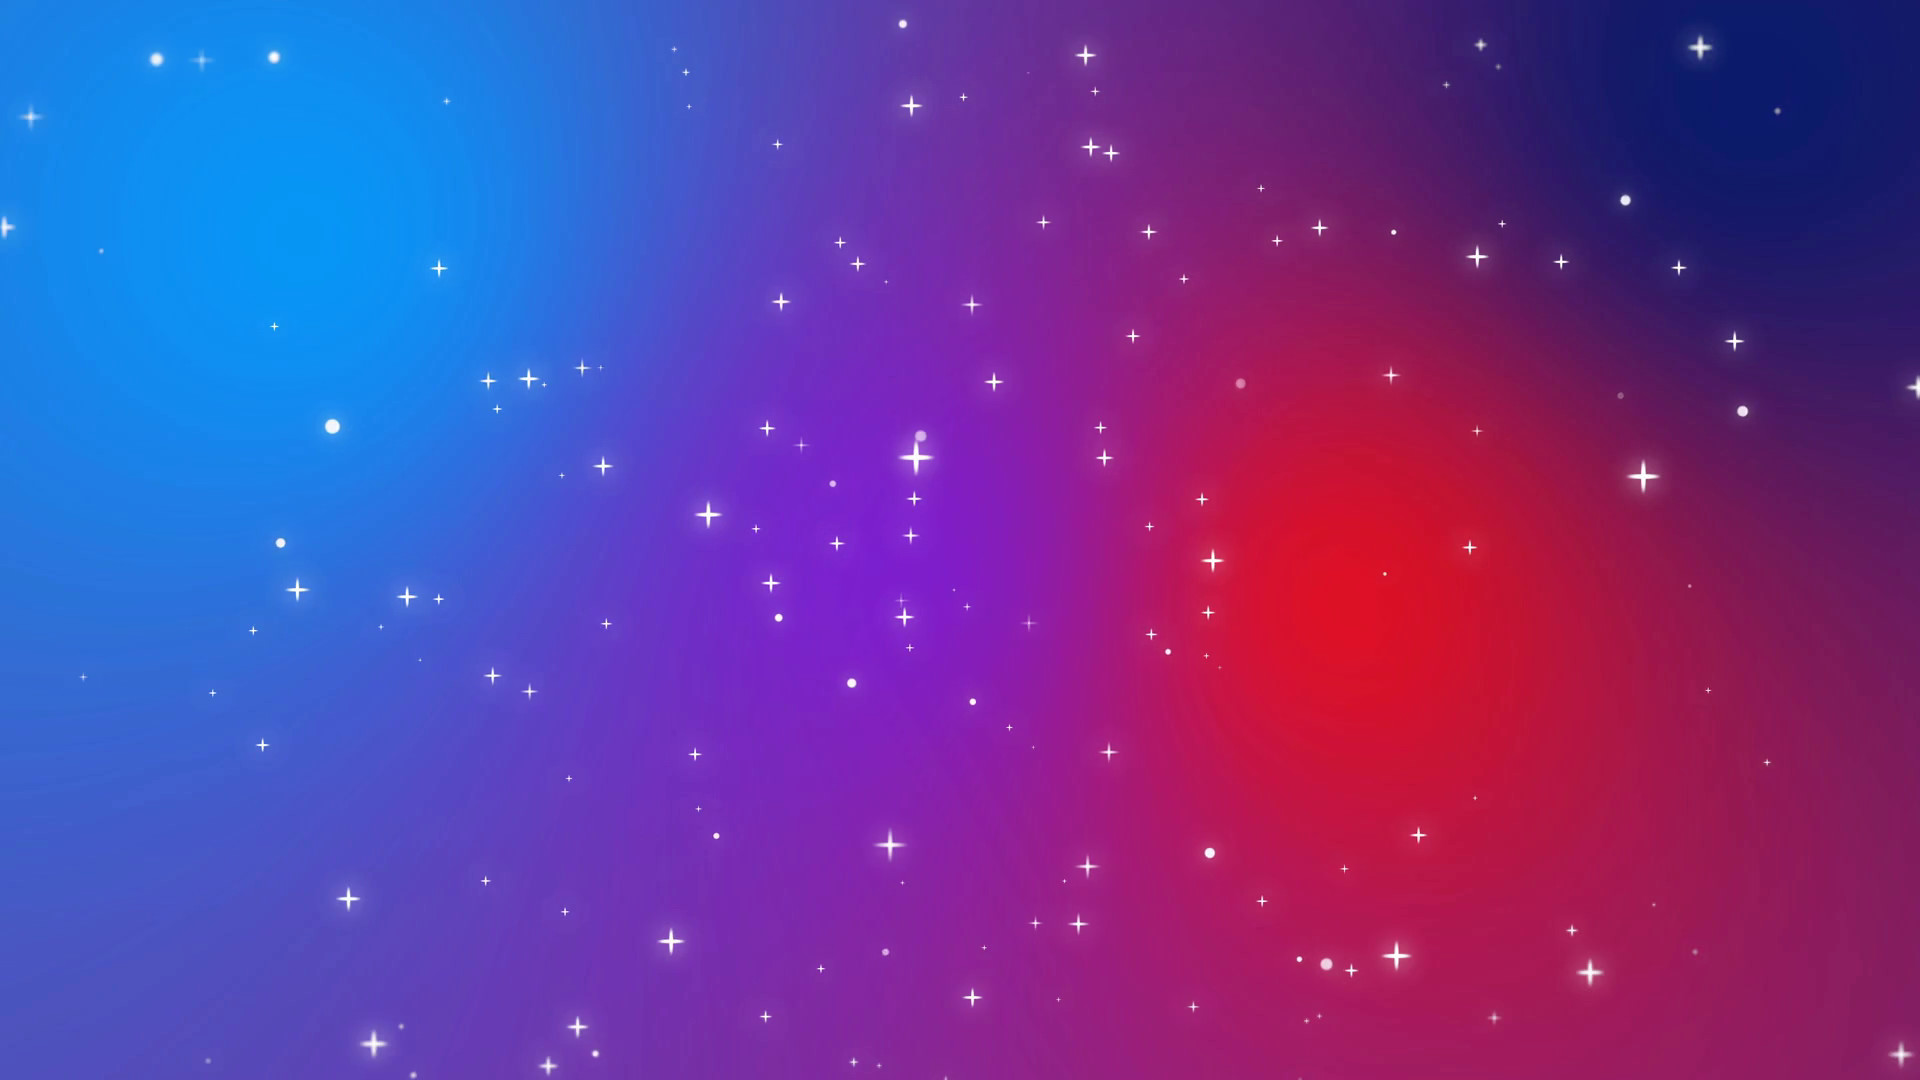 1920x1080 Subscription Library Sparkly white light particles moving across a red purple  blue gradient background imitating night sky full